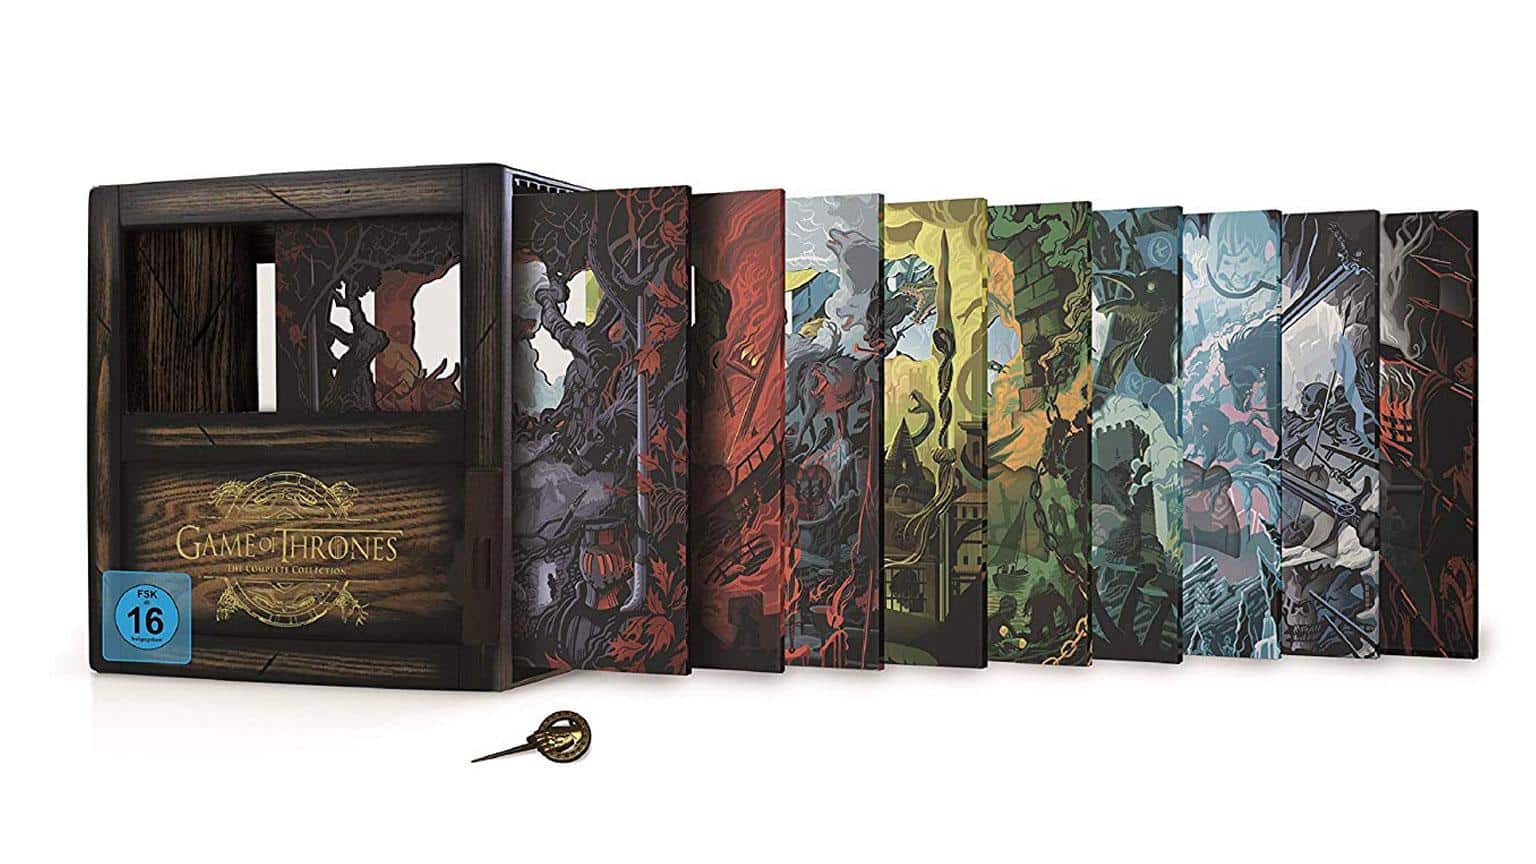 GAME OF THRONES Limited Collector’s Edition Artiklebild